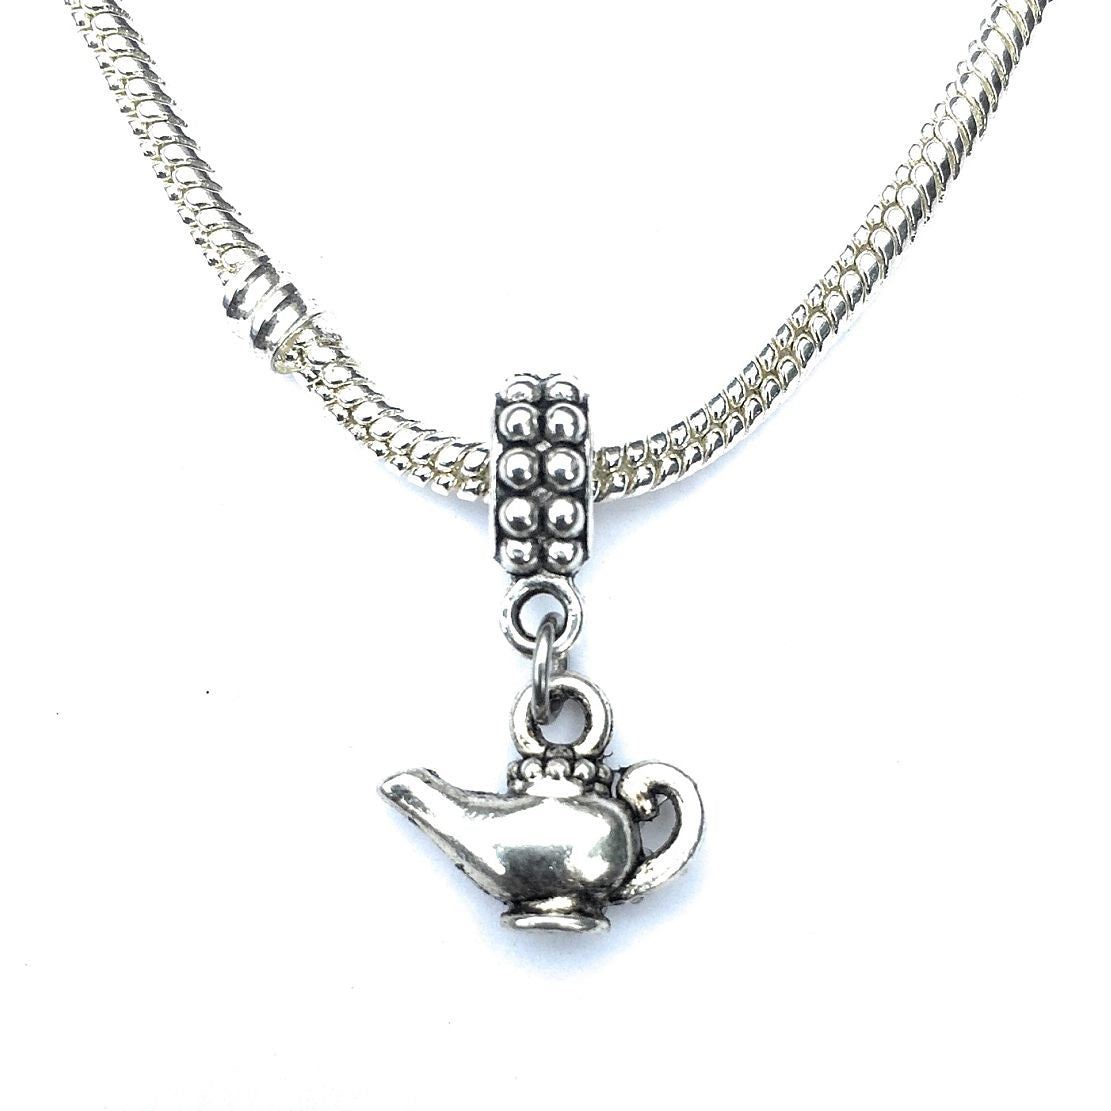 Handcrafted Silver Genie Lamp Charm Bead for Bracelet.